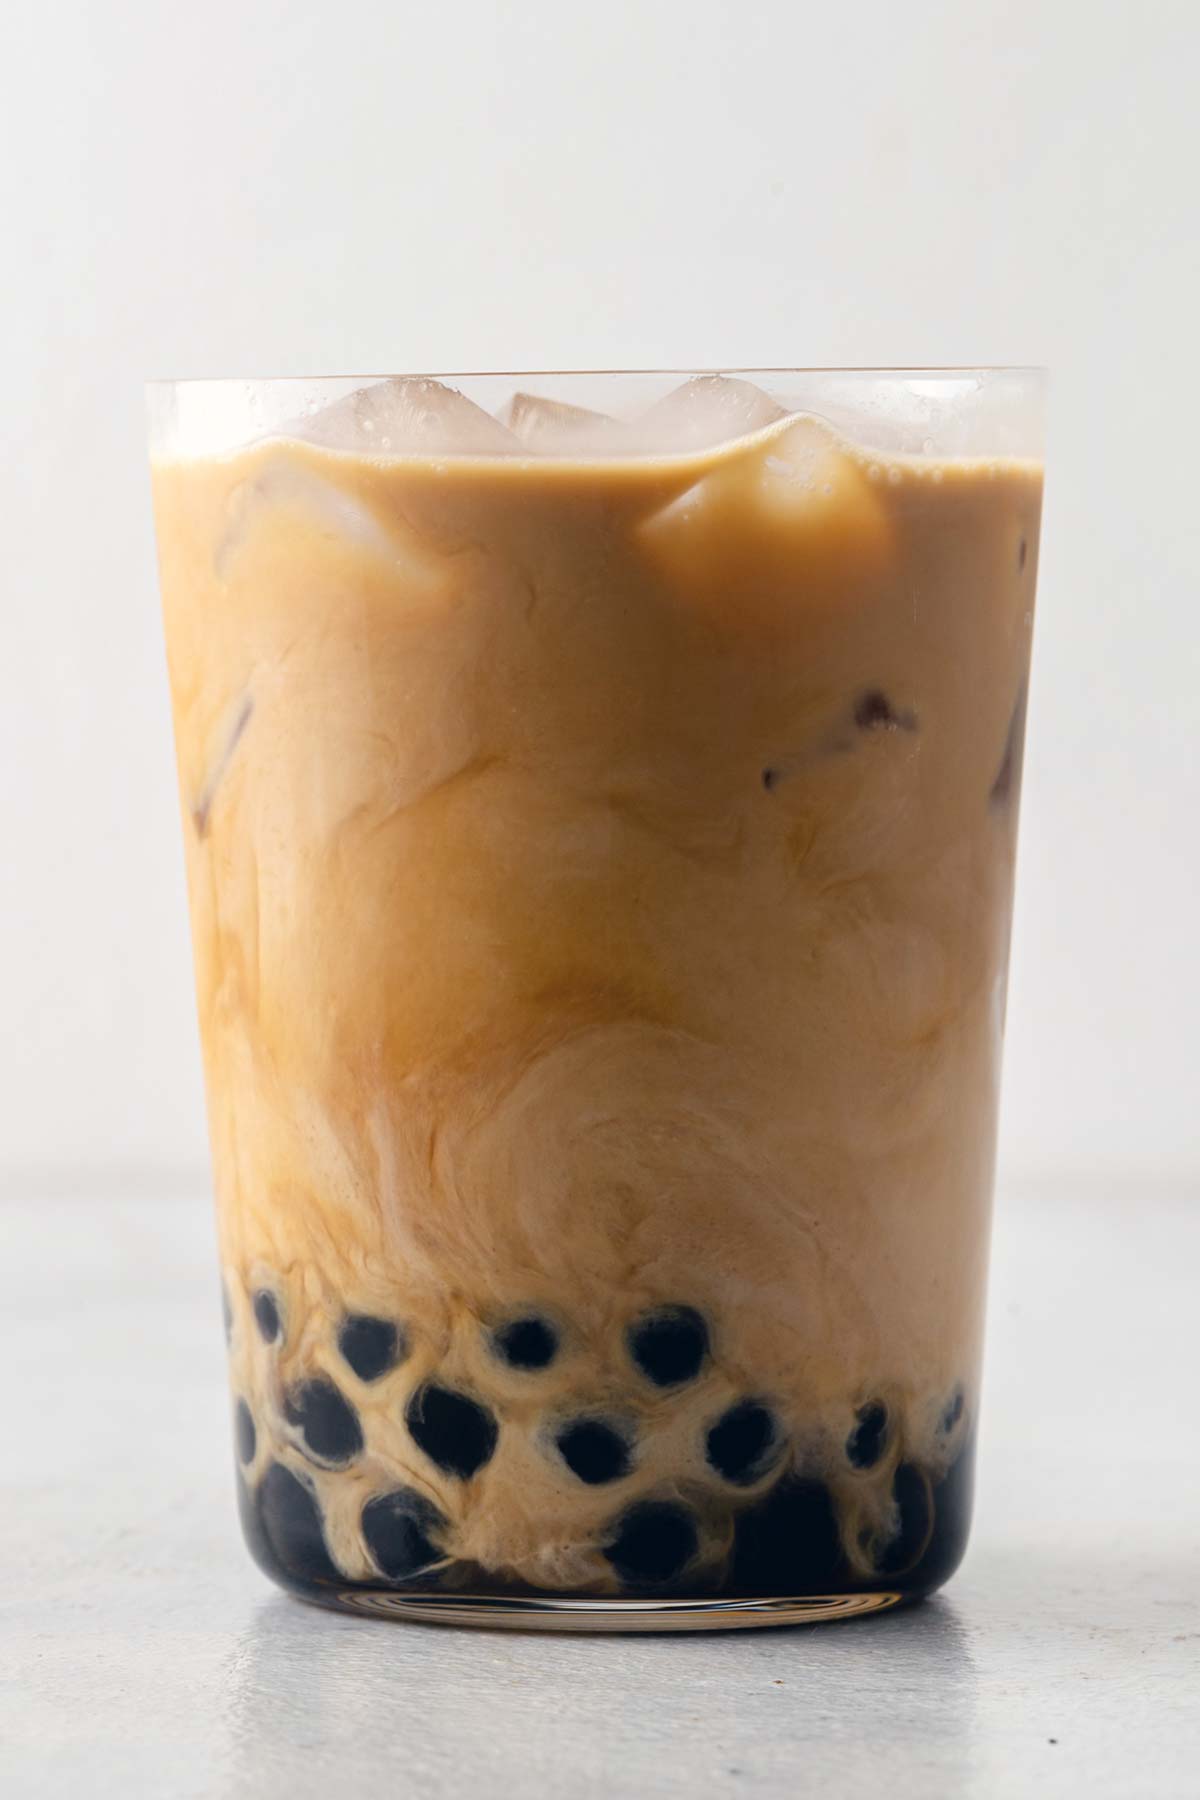 Iced Coffee Boba with the milk swirling in the glass and the boba at the bottom.